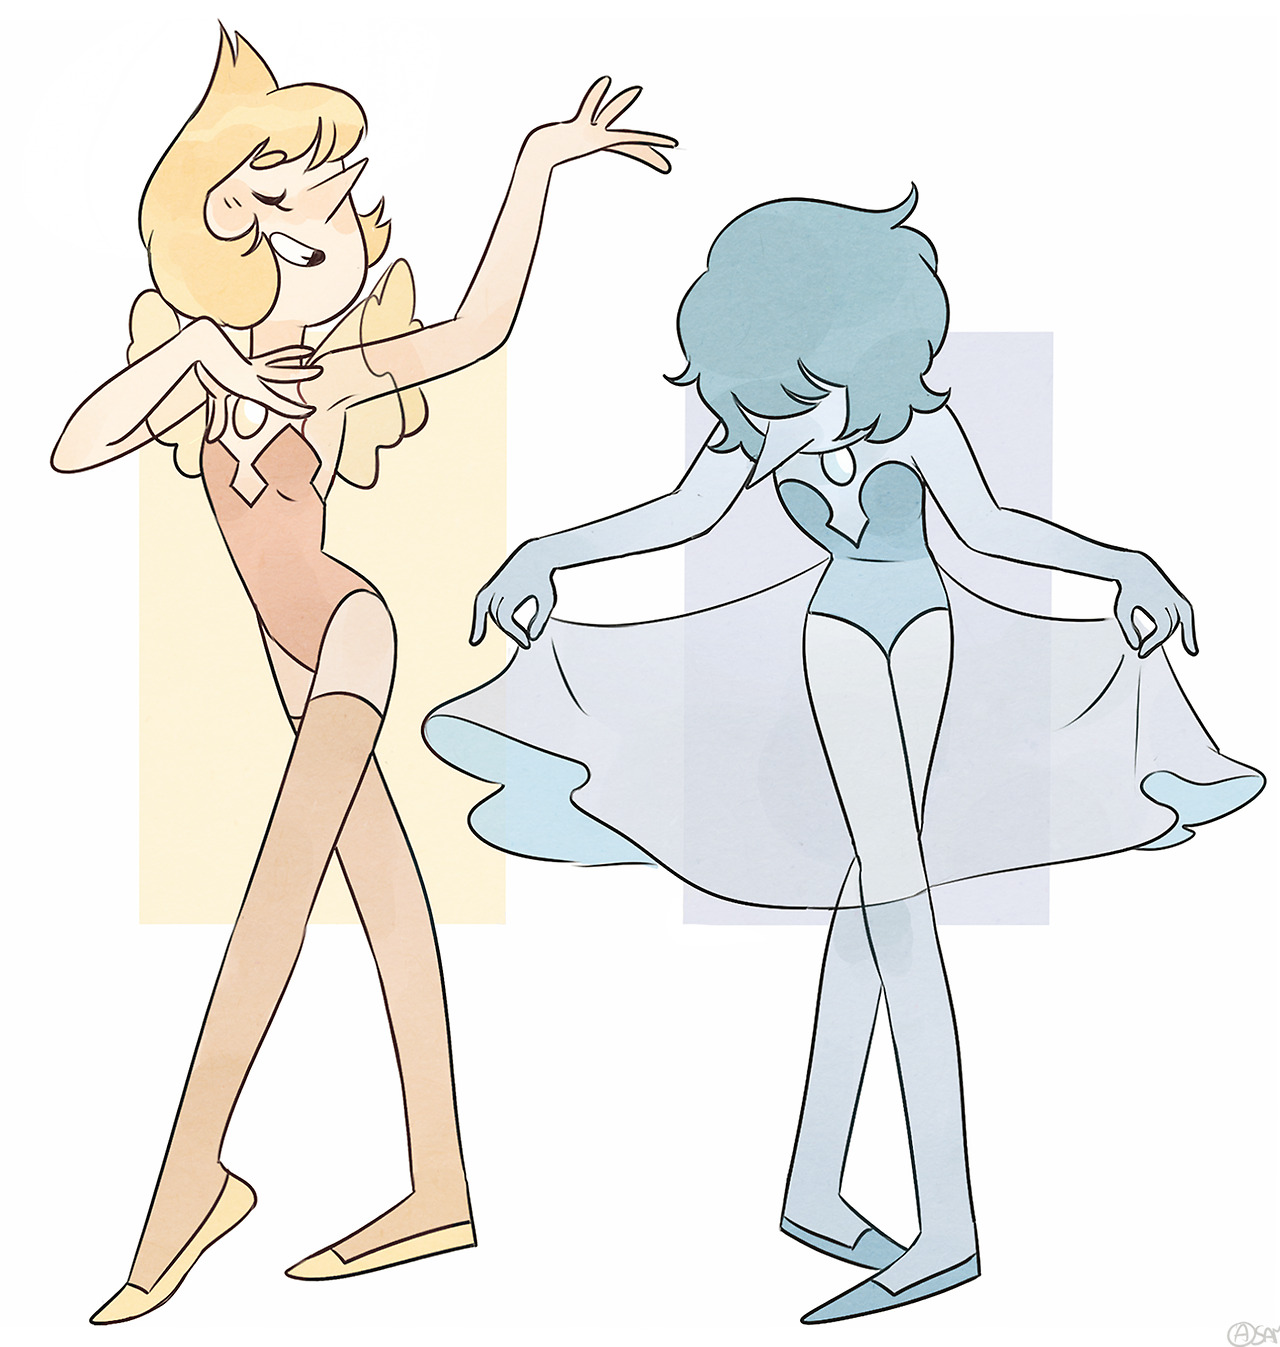 Yellow and Blue pearl! The pose are inspired to their apparitions in “the trial”.